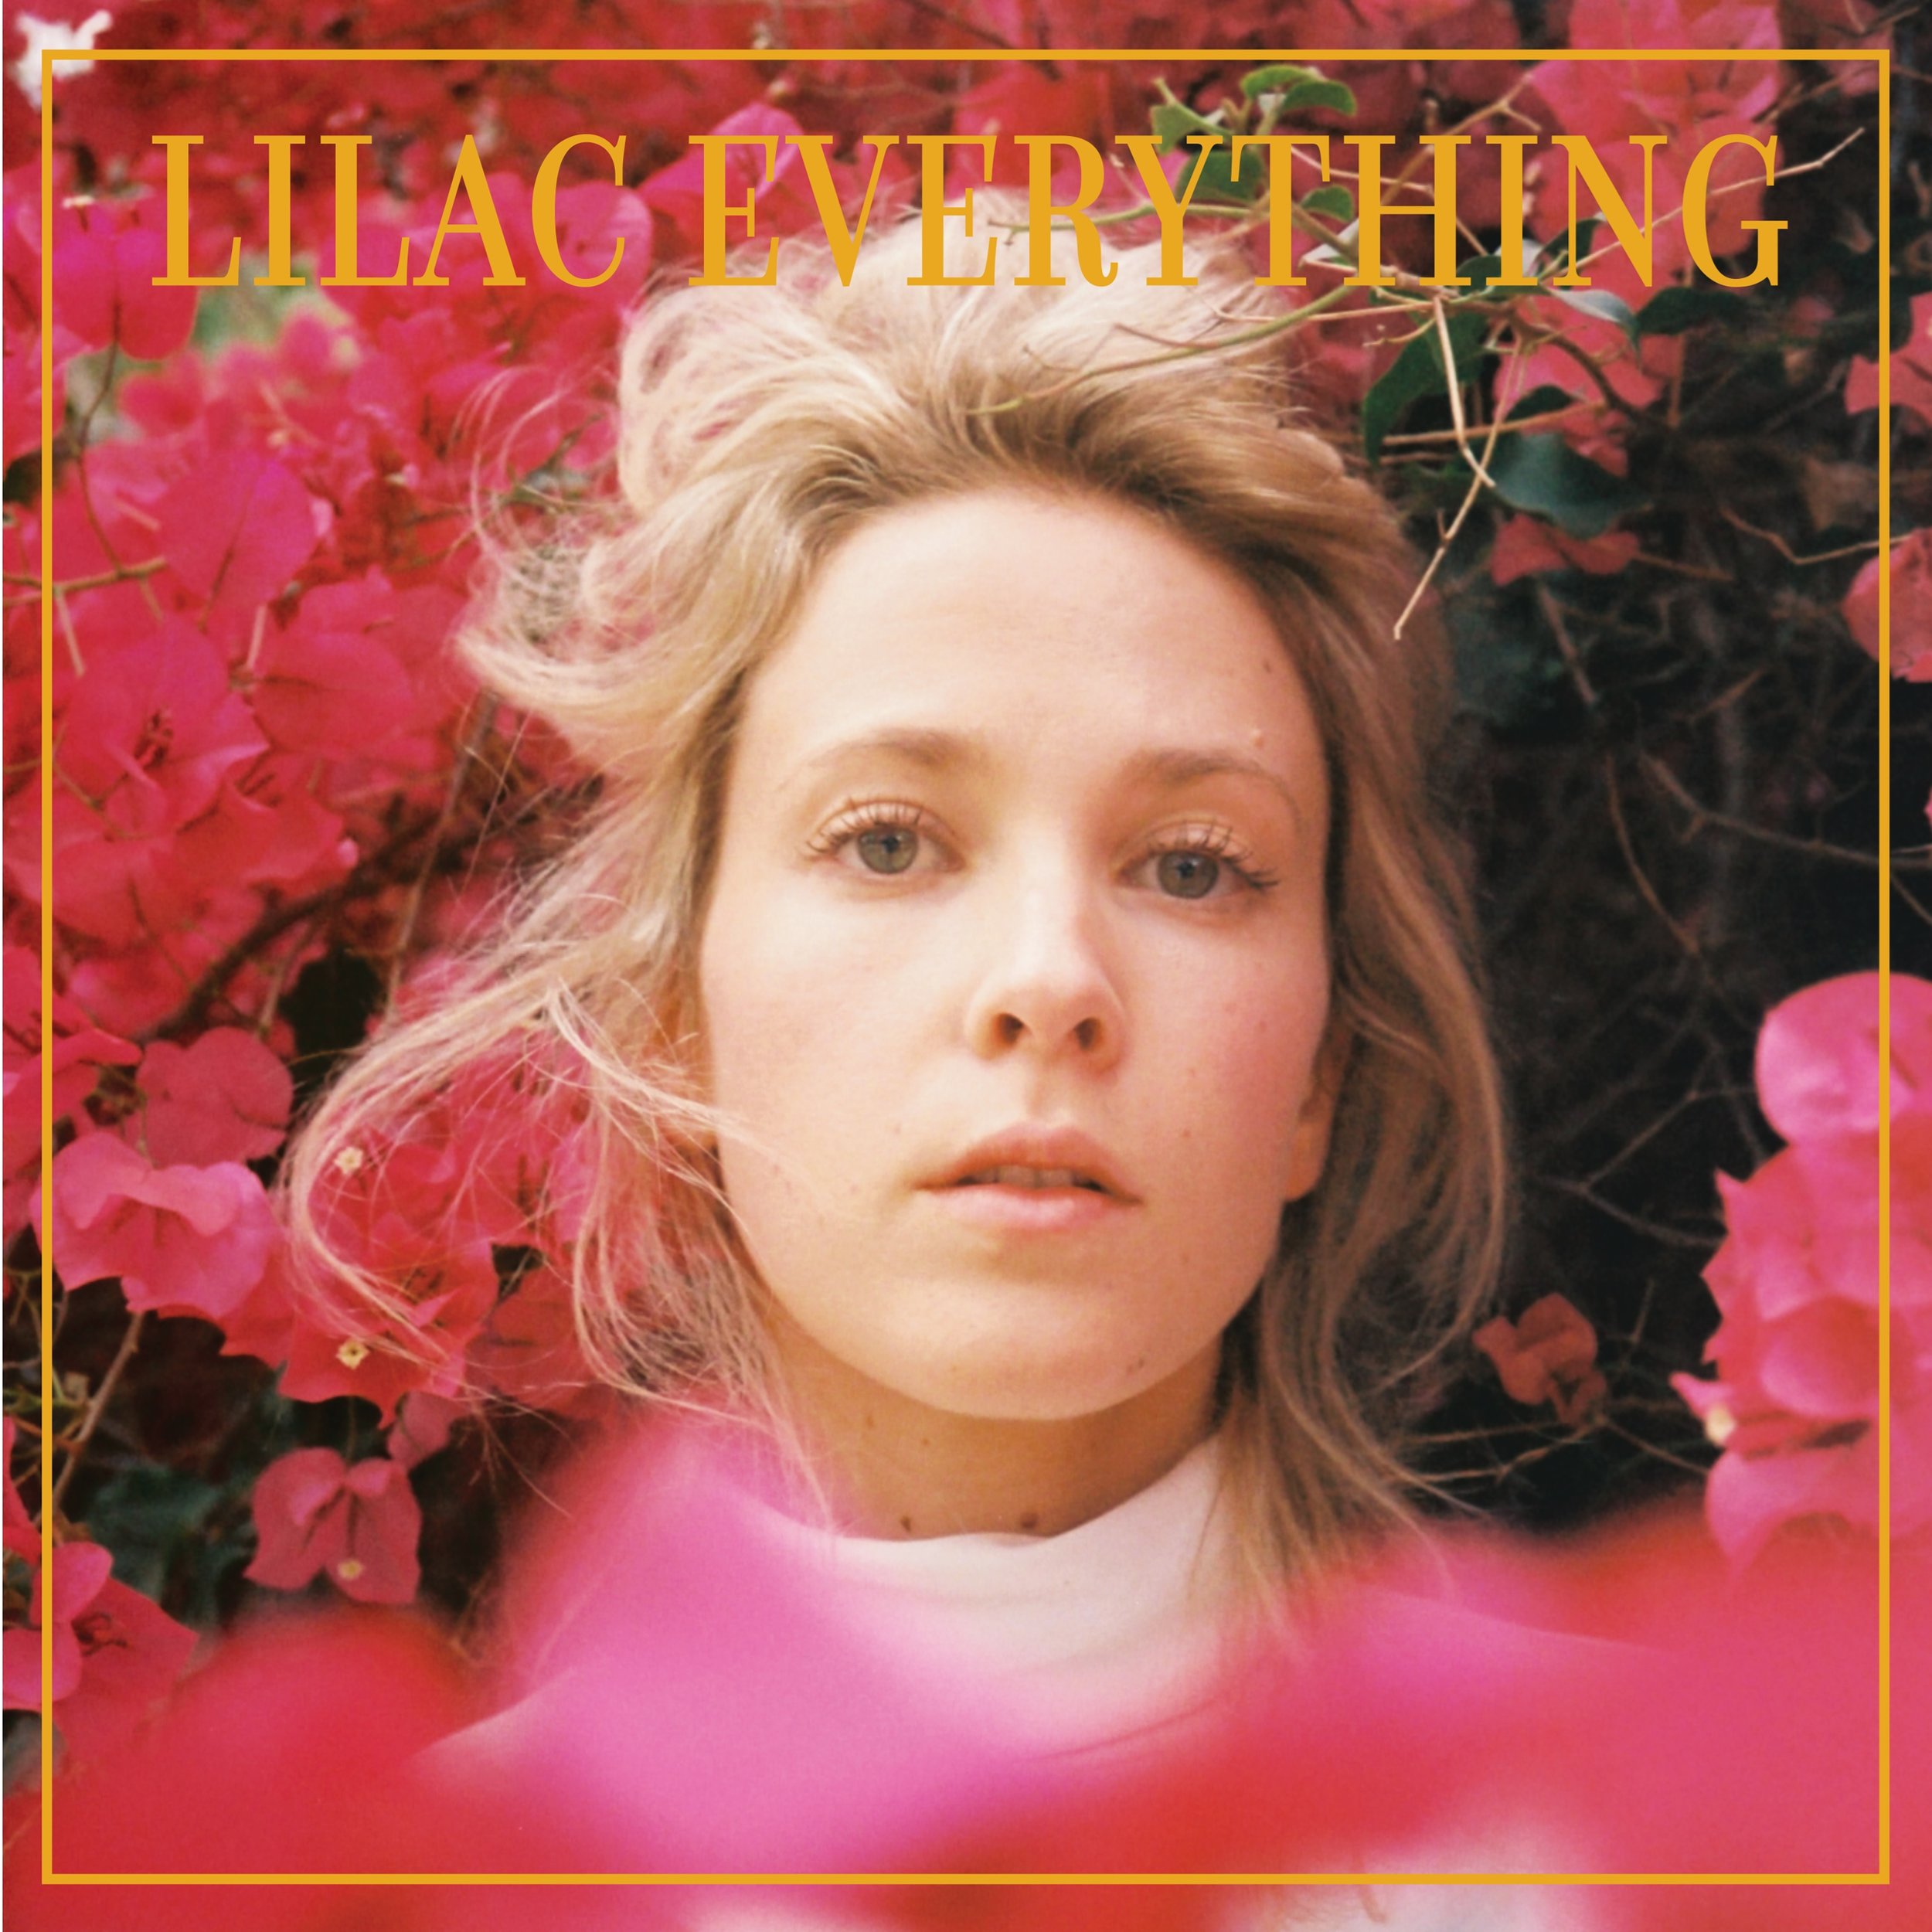 Lilac Everything; A Project by Emma Louise - Album Art.jpg